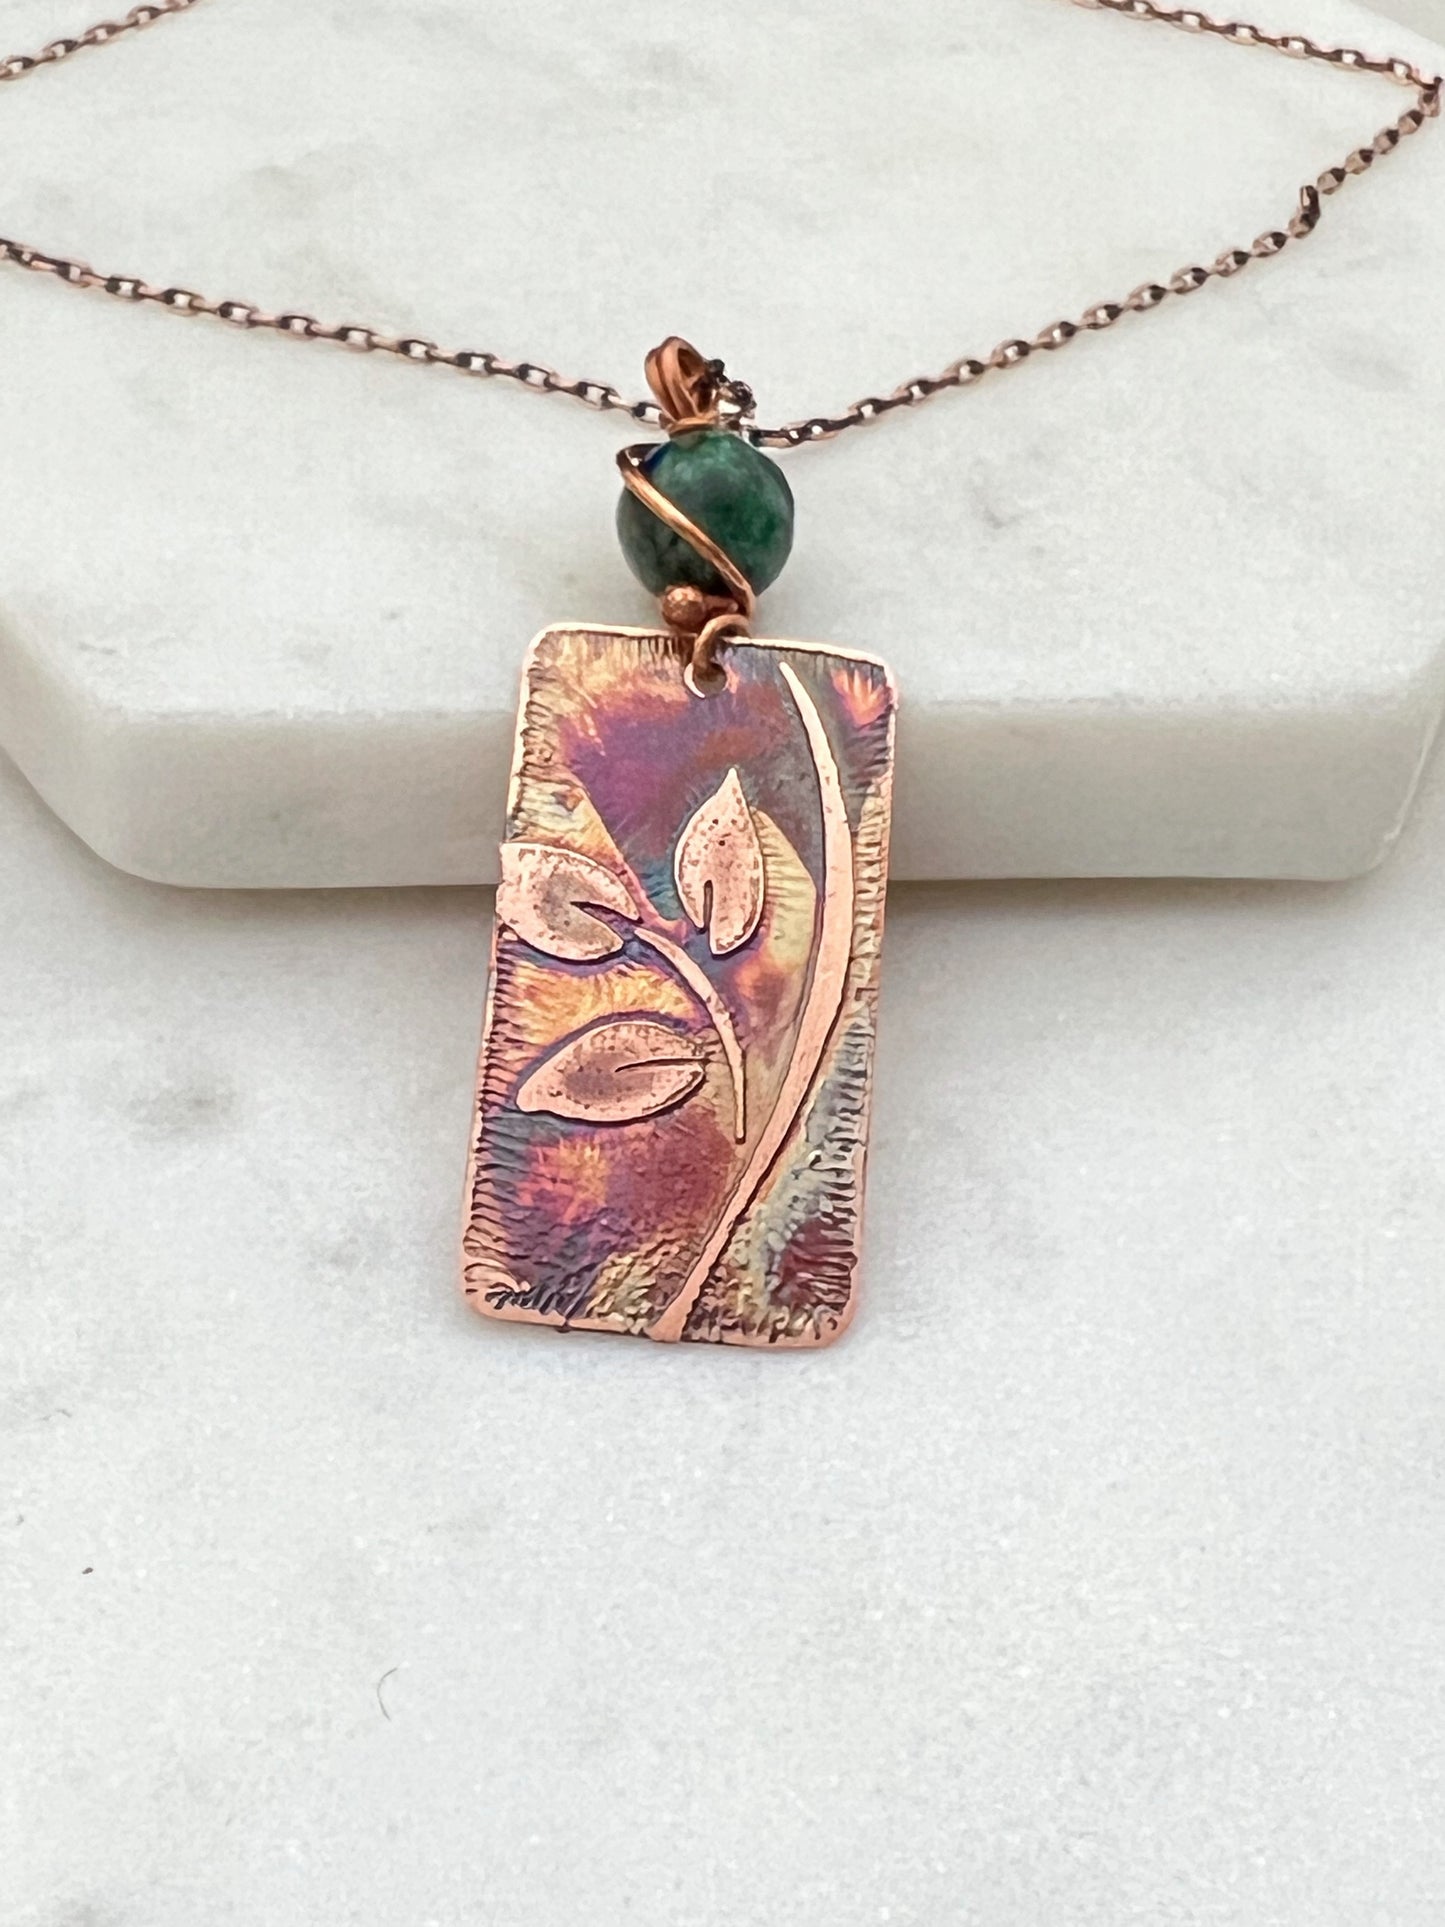 Acid etched copper leaf necklace with chrysocolla gemstone